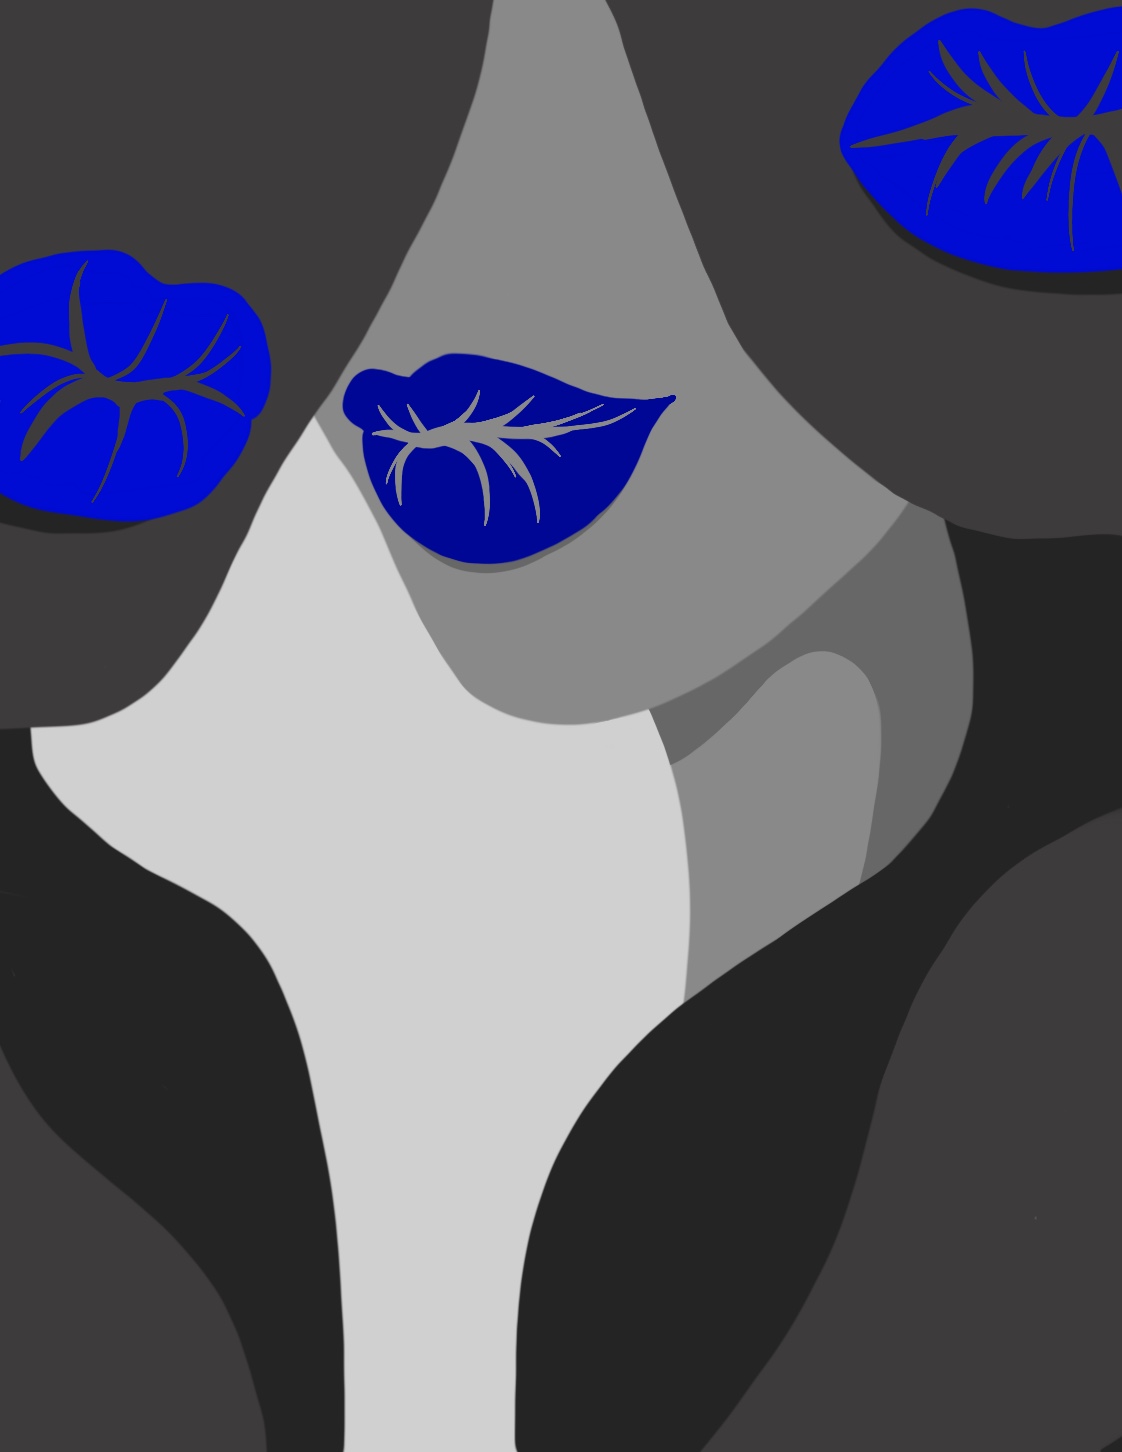 Illustrative art with three grey figures and blue lips